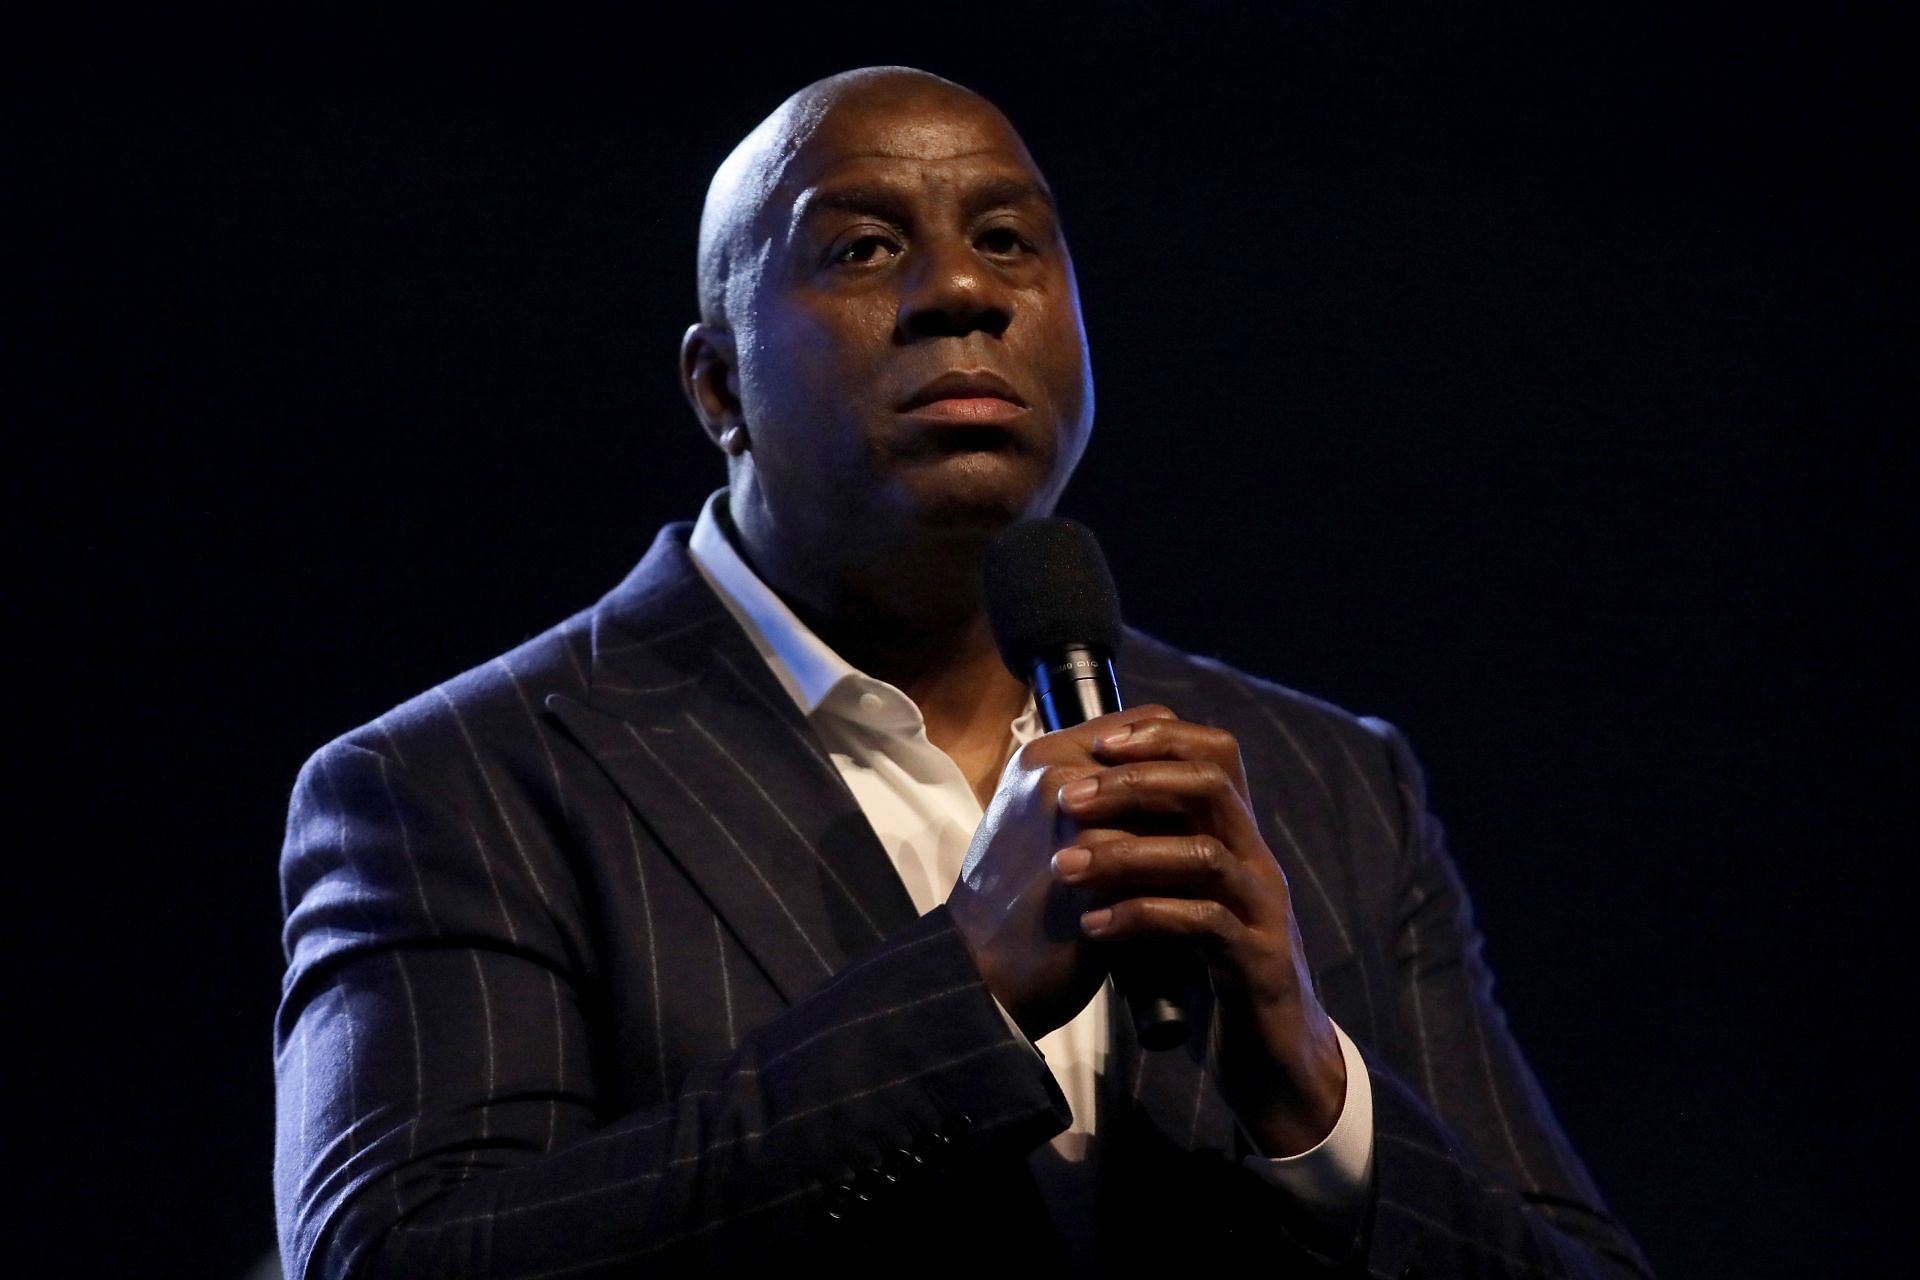 Magic Johnson had some harsh words for the LA Lakers following their 96-133 loss to the Denver Nuggets